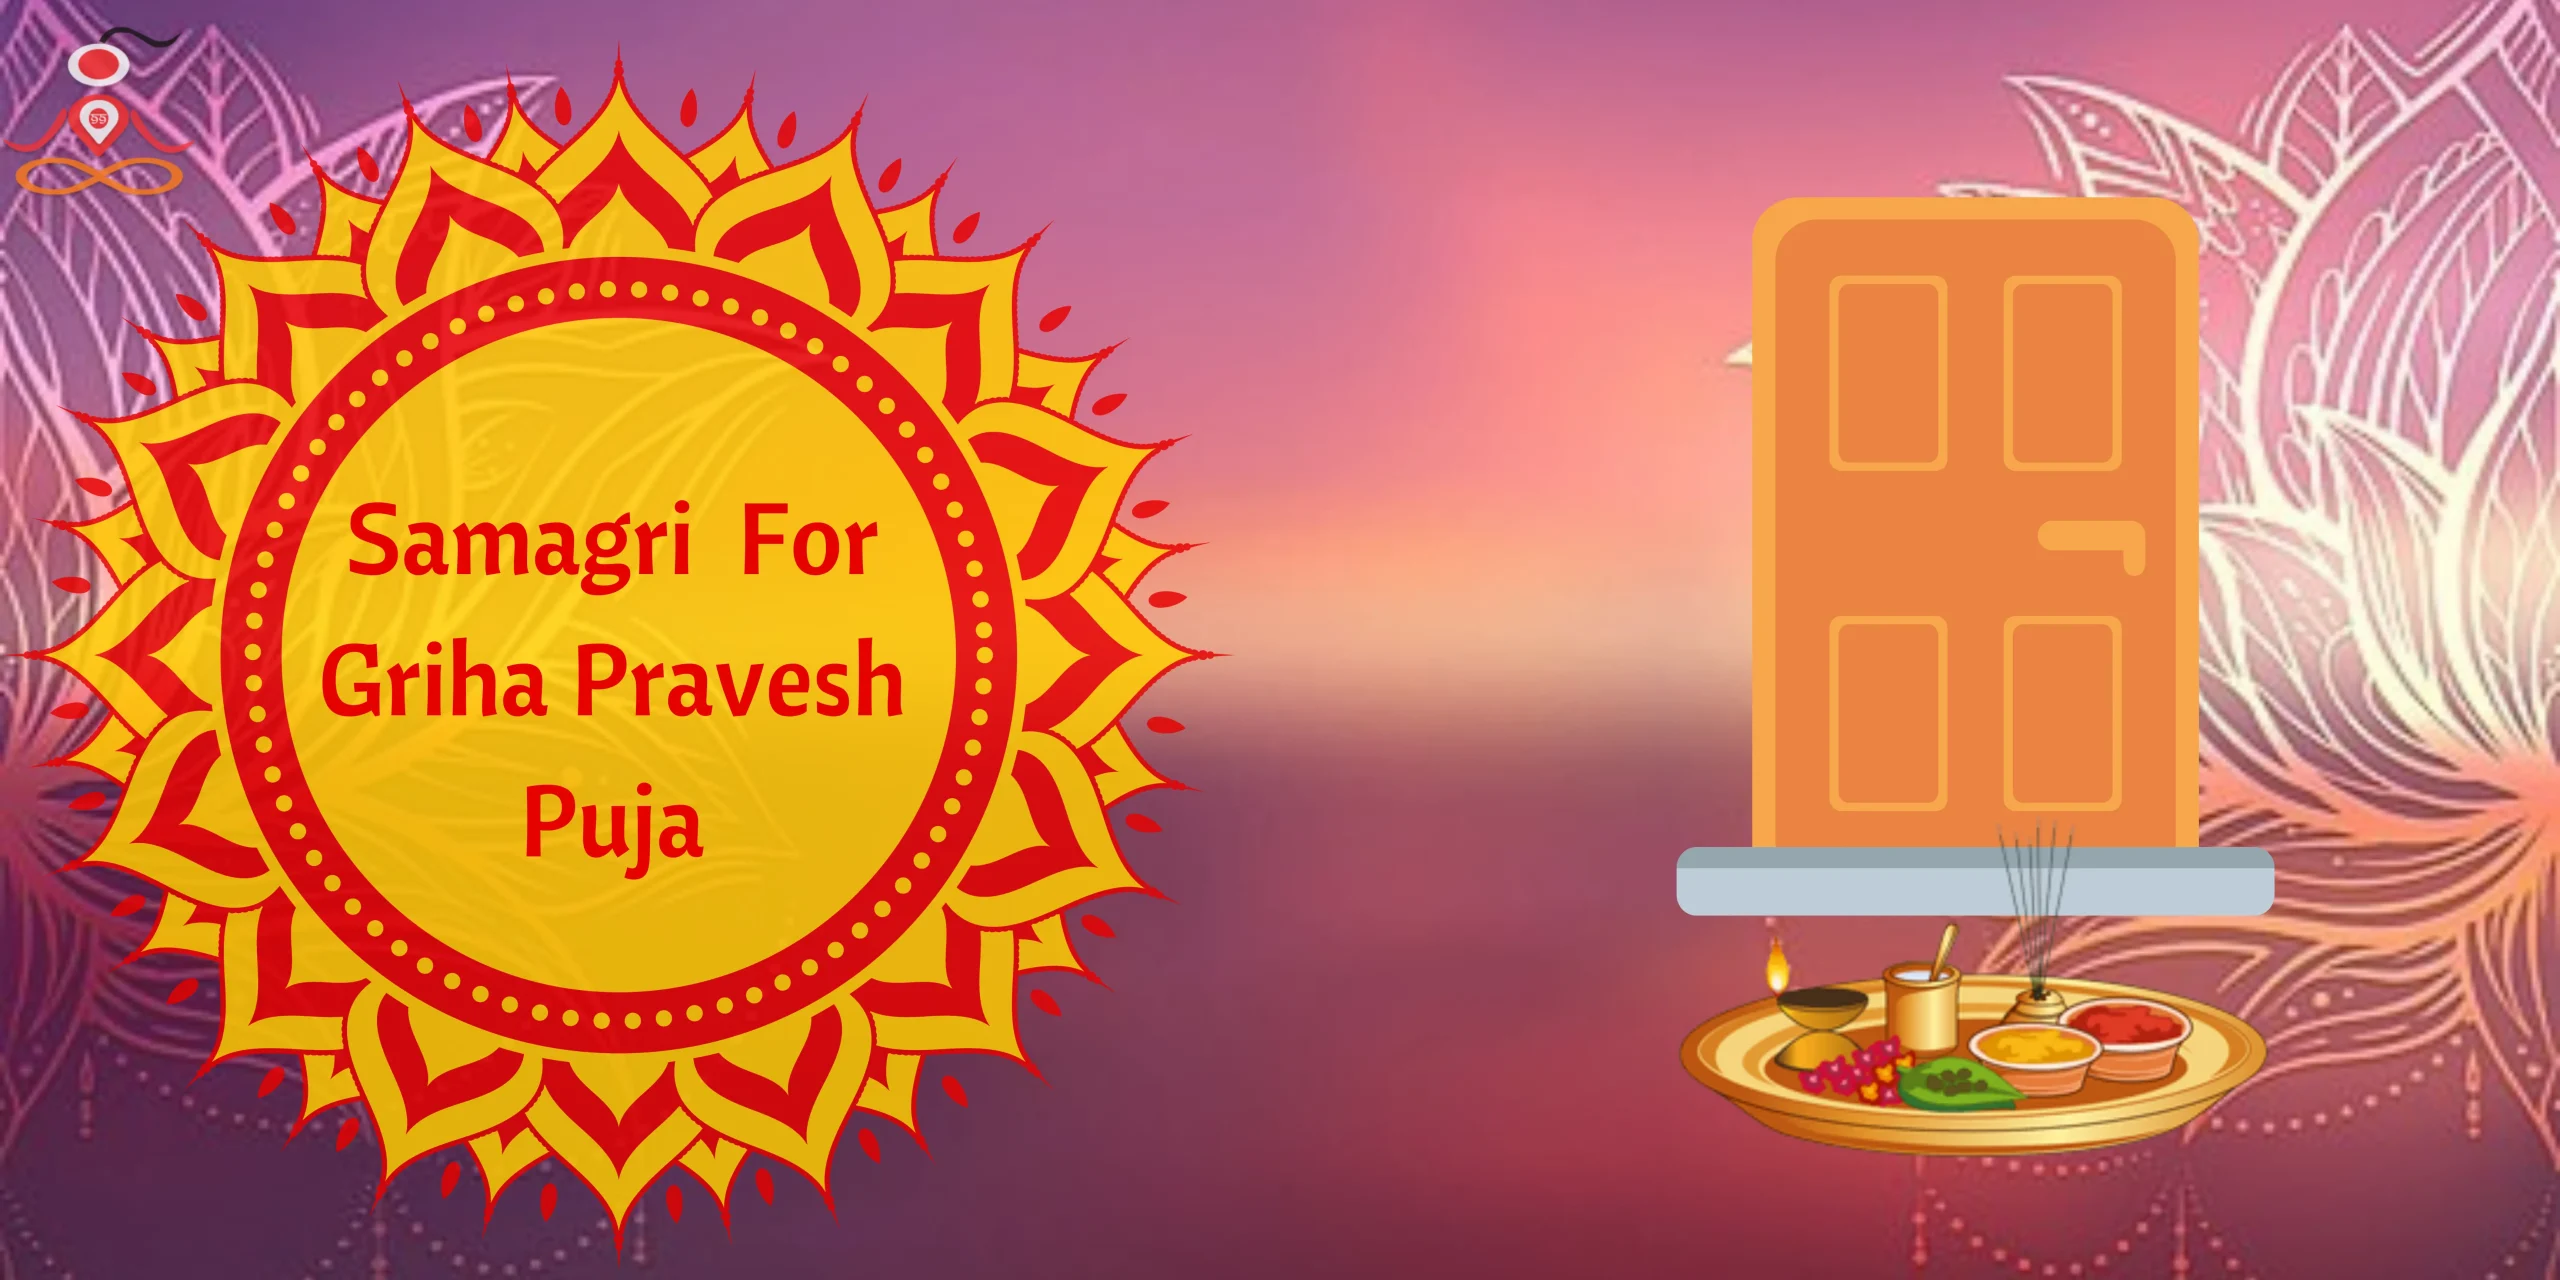 10 practical and beautiful griha pravesh gift ideas | Housing News